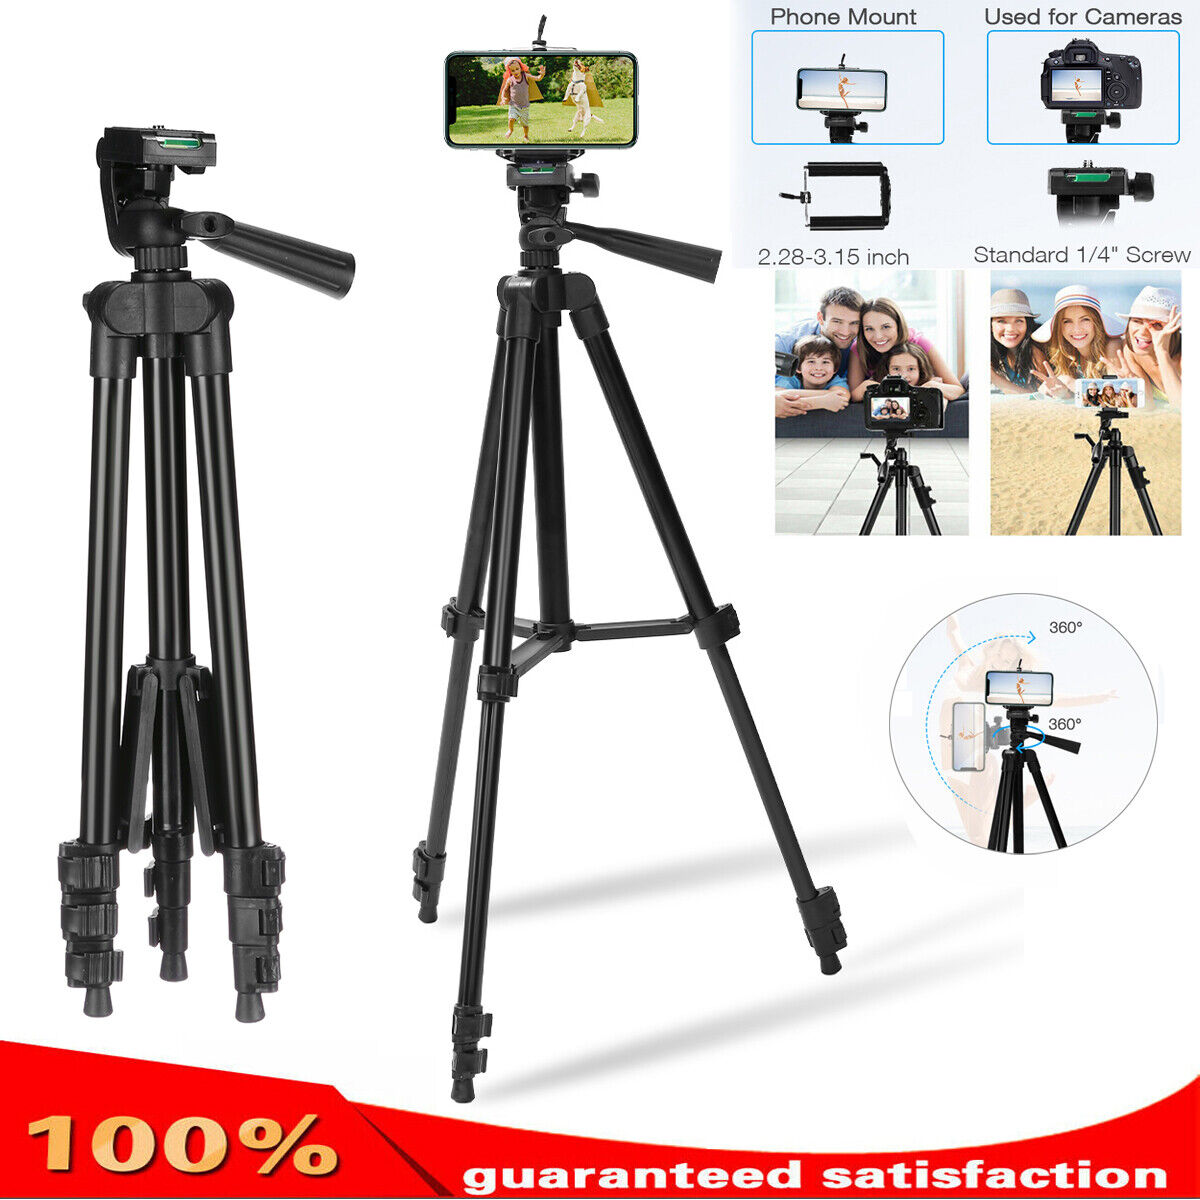 Professional Camera Tripod Stand Holder Mount for iPhone Samsung Cell Phone